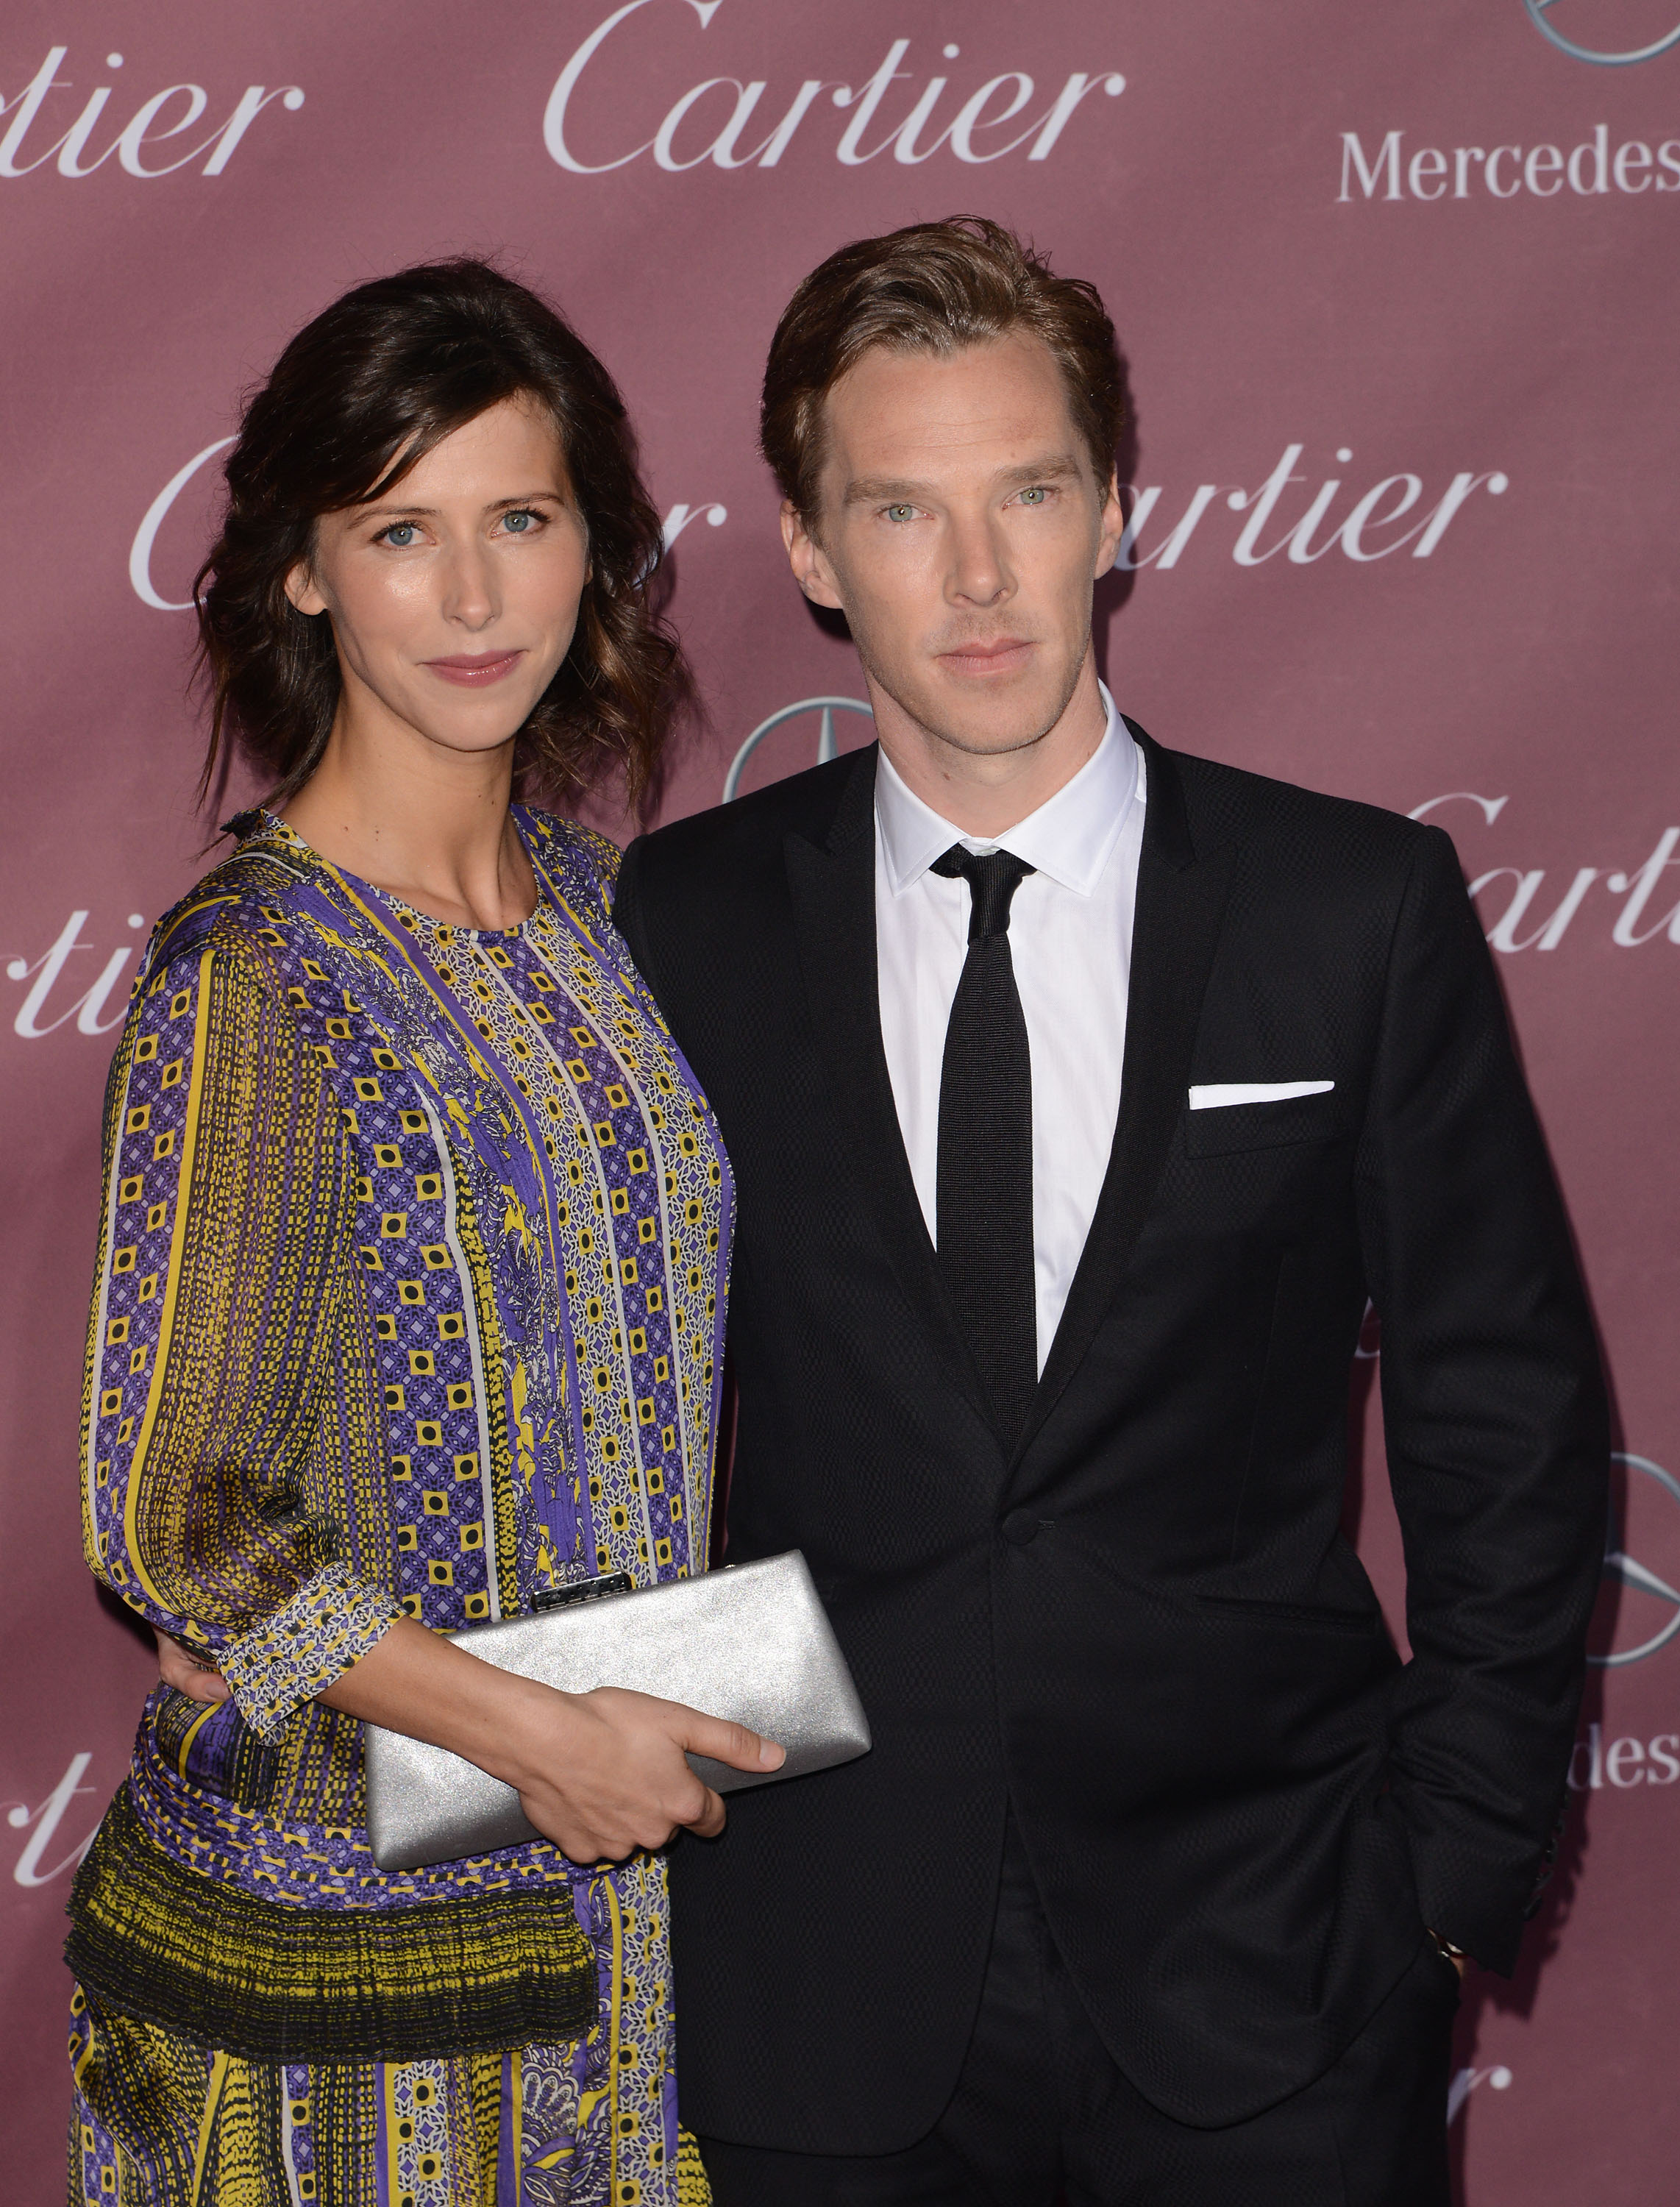 Actors Sophie Hunter and Benedict Cumberbatch attend the 26th Annual Palm Springs International Film Festival in Palm Springs, Ca. on Jan. 3, 2015.